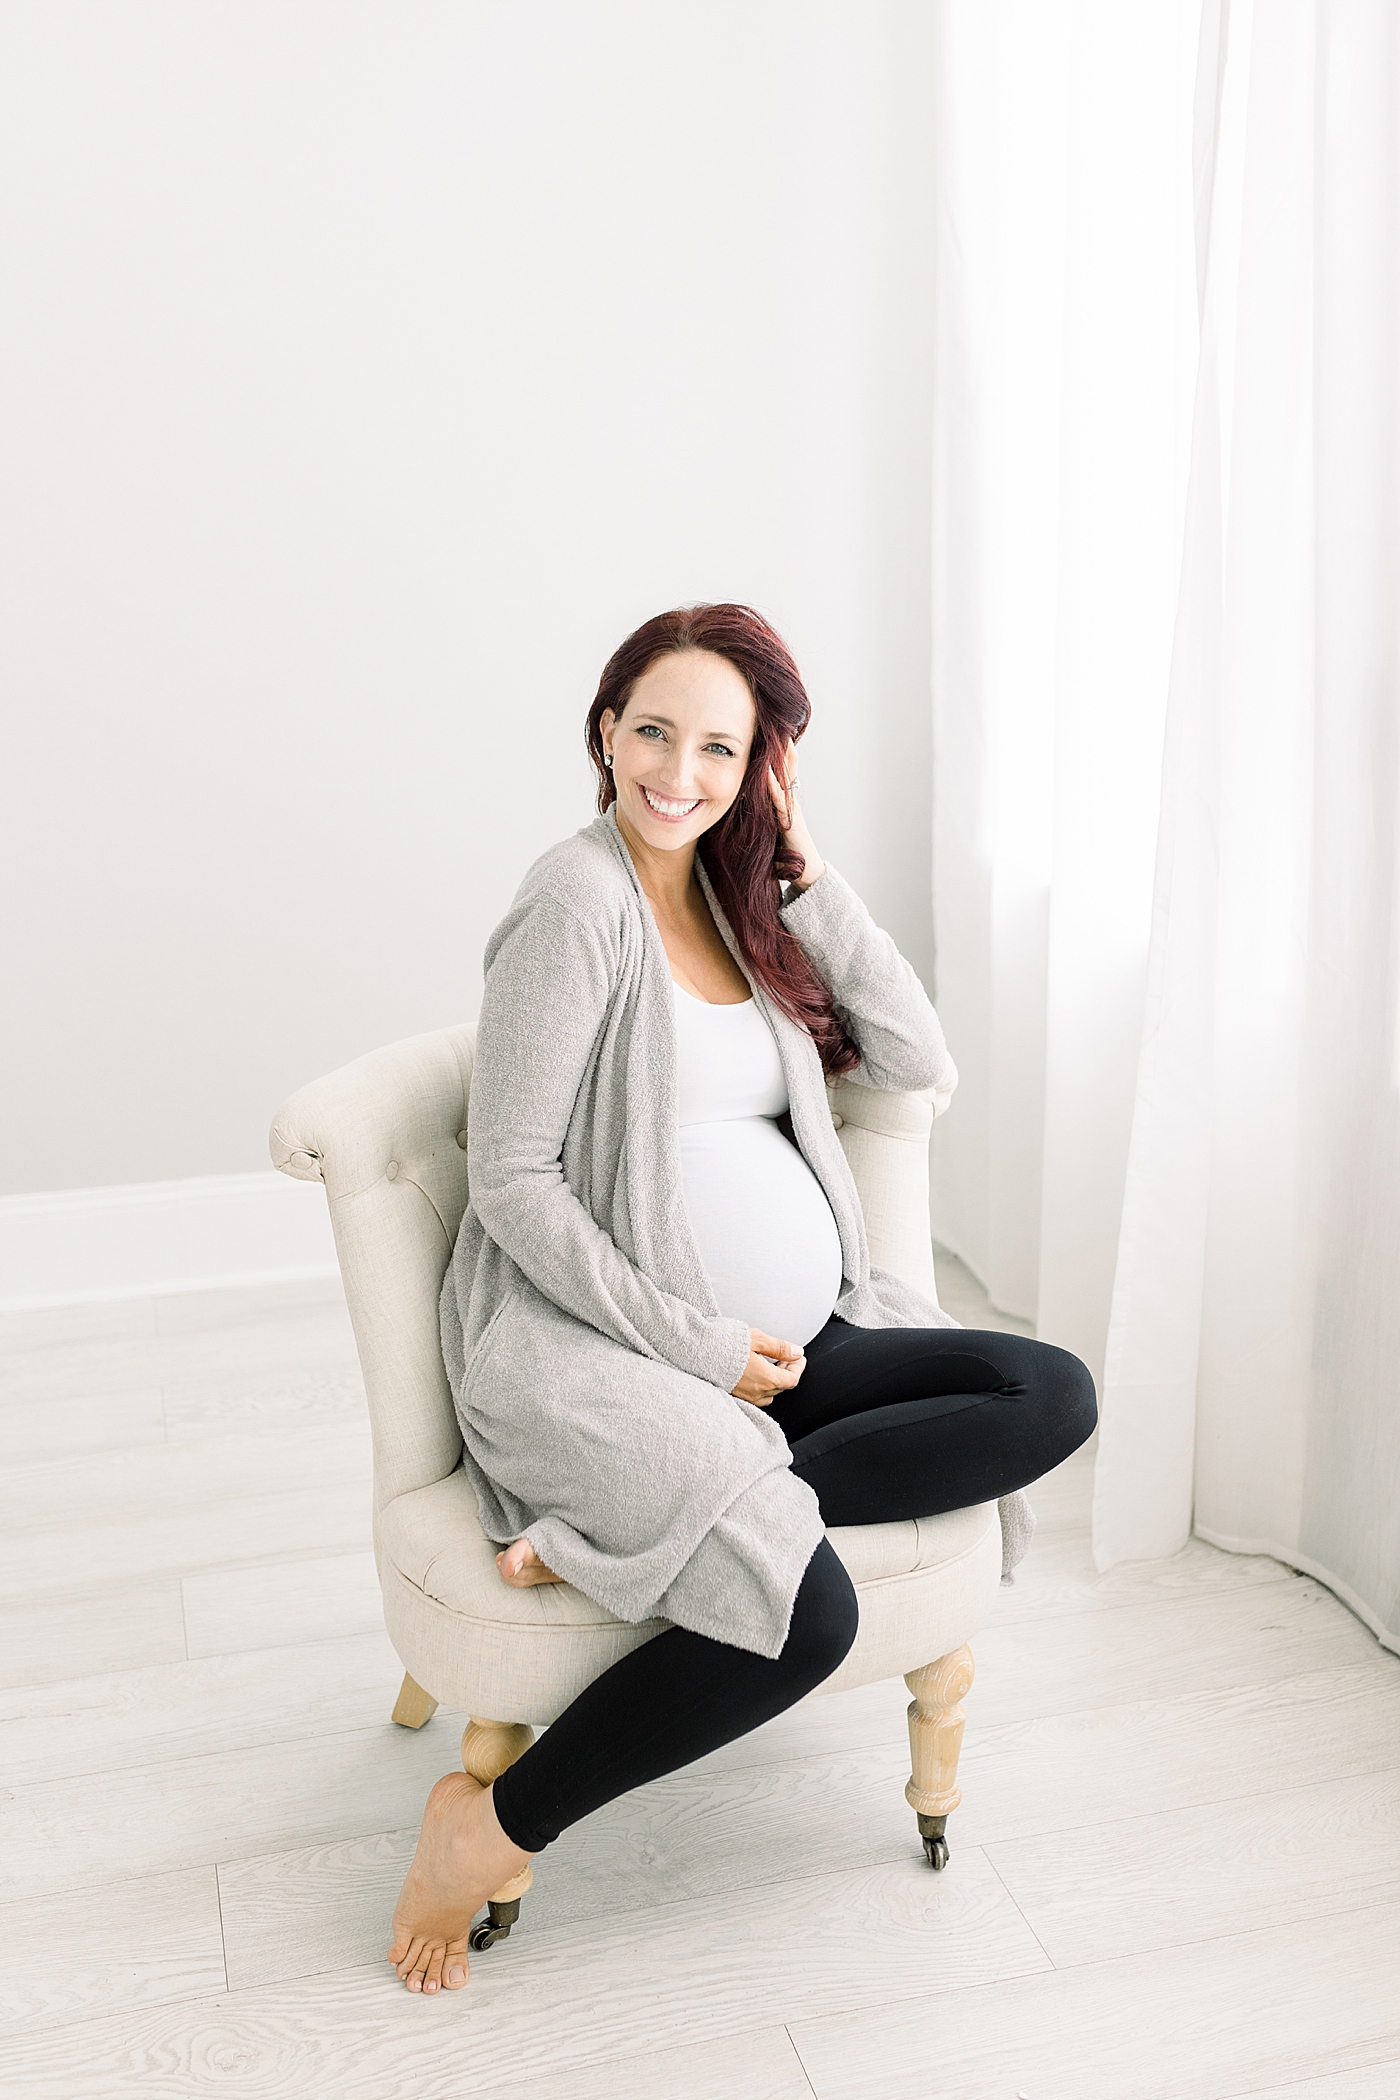 Pregnant mom sharing 5 maternity must-haves | Photos of Brittany Elise Photography.